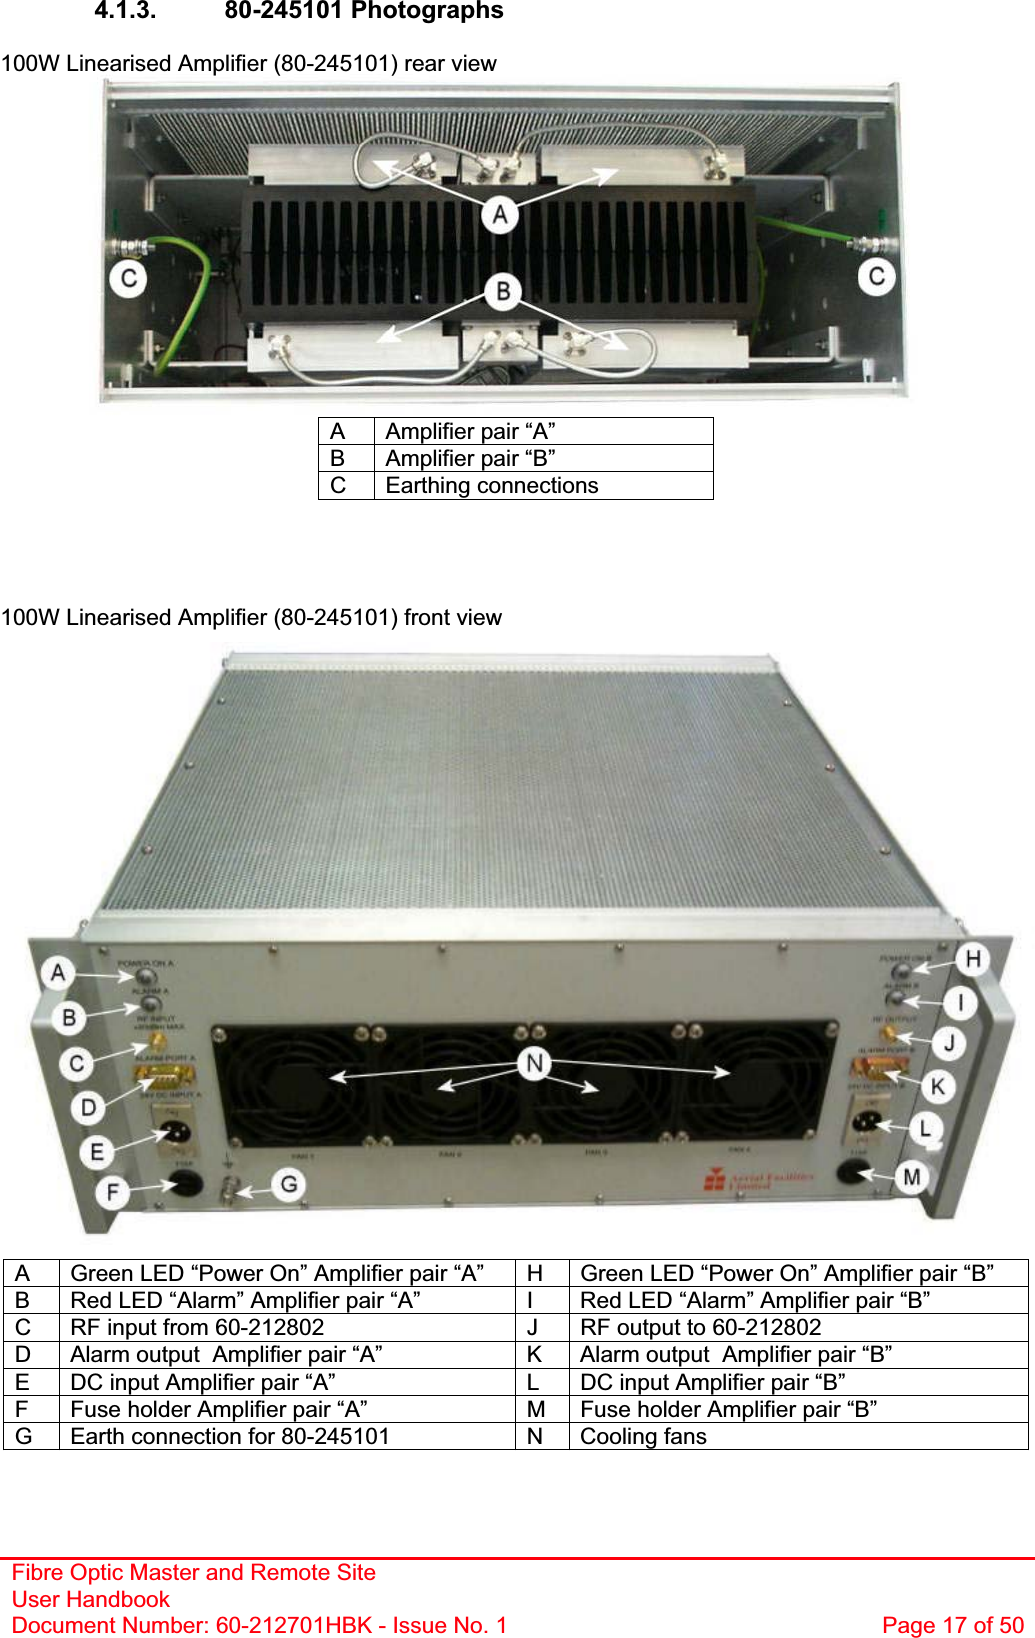 Fibre Optic Master and Remote Site User Handbook Document Number: 60-212701HBK - Issue No. 1  Page 17 of 504.1.3. 80-245101 Photographs 100W Linearised Amplifier (80-245101) rear view A  Amplifier pair “A” B  Amplifier pair “B” C Earthing connections 100W Linearised Amplifier (80-245101) front view A  Green LED “Power On” Amplifier pair “A”  H  Green LED “Power On” Amplifier pair “B” B  Red LED “Alarm” Amplifier pair “A”  I  Red LED “Alarm” Amplifier pair “B” C  RF input from 60-212802  J  RF output to 60-212802 D  Alarm output  Amplifier pair “A”  K  Alarm output  Amplifier pair “B” E  DC input Amplifier pair “A”  L  DC input Amplifier pair “B” F  Fuse holder Amplifier pair “A”  M  Fuse holder Amplifier pair “B” G  Earth connection for 80-245101  N  Cooling fans 